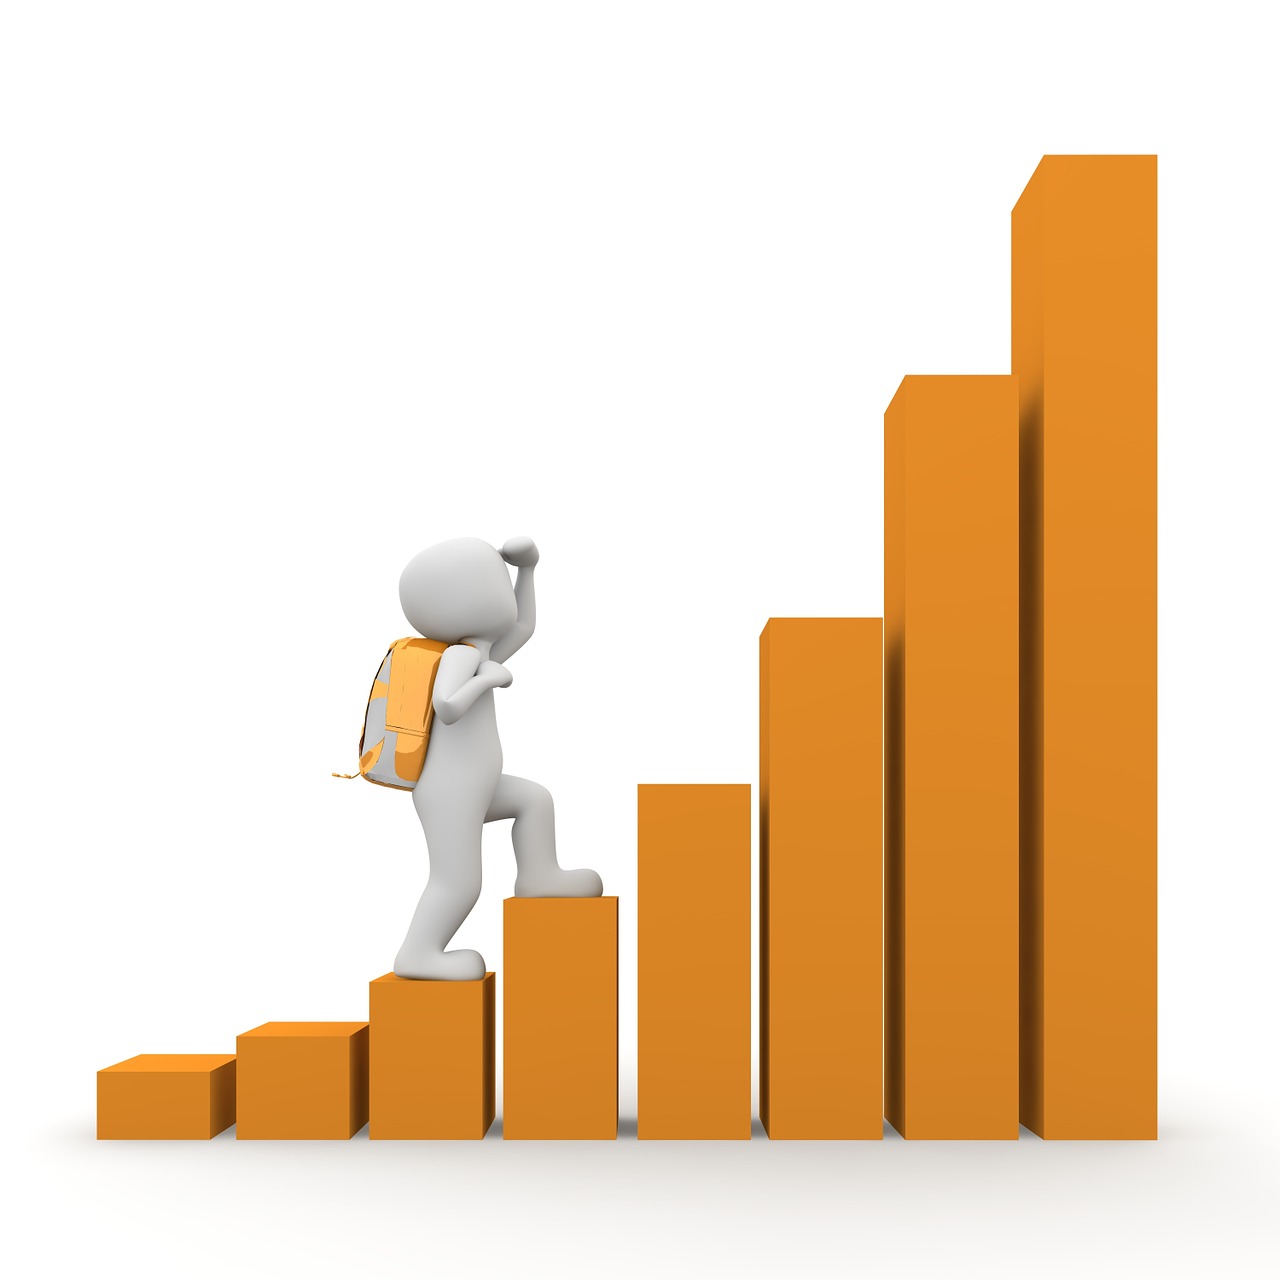 Clay figurine appearing to climb up a three dimensional bar graph with increasing orange bars